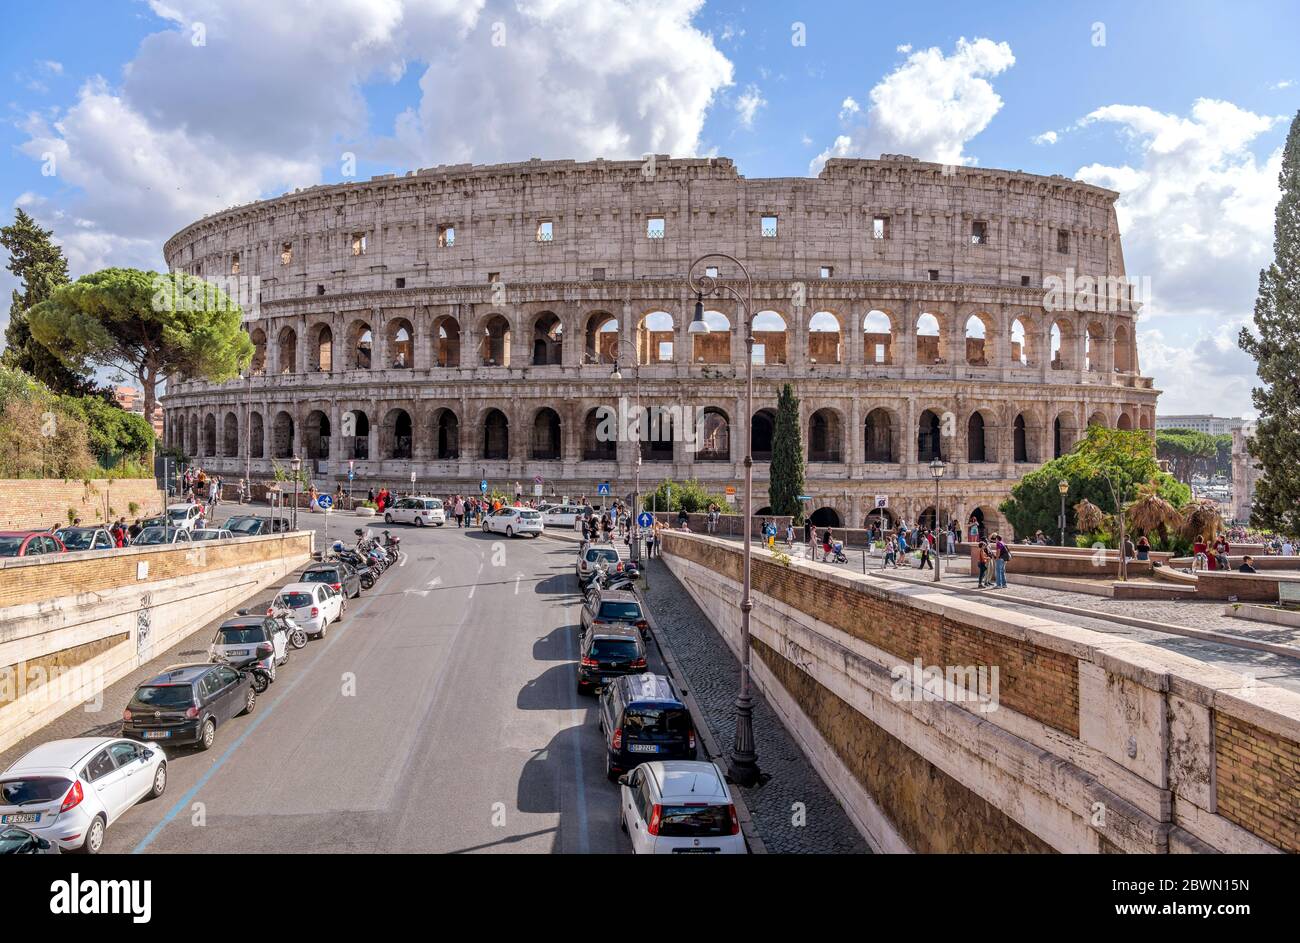 Colosseum - A street full-view of north outer wall of the Colosseum on a sunny October afternoon. Rome, Italy. Stock Photo